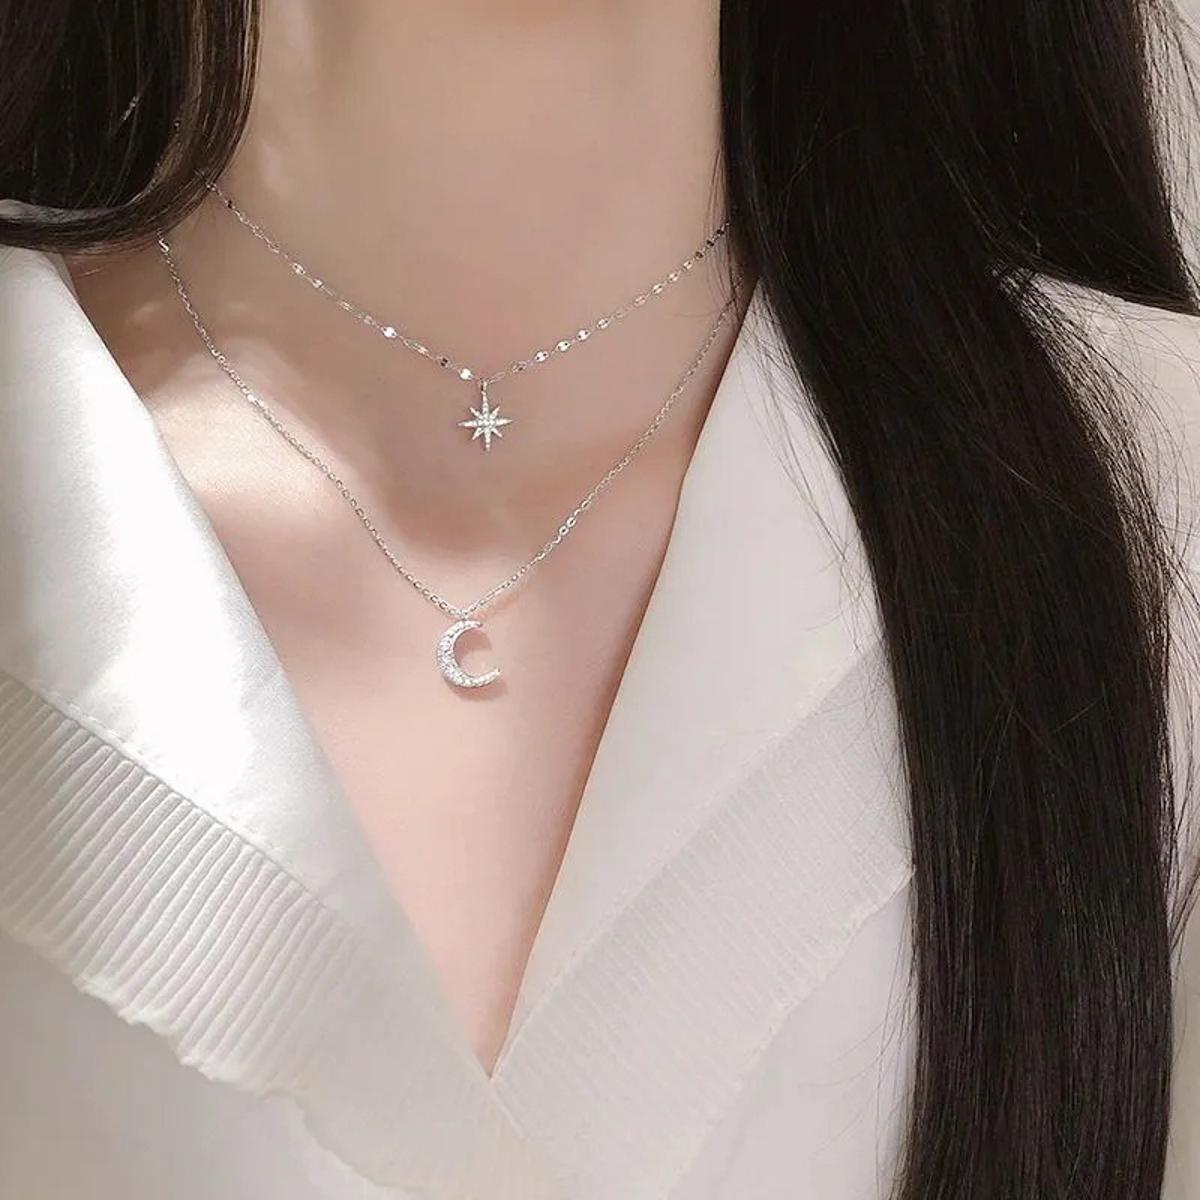 Charm Clavicle Chain Necklaces Ladies Ins Style Girls Trendy Twinkle Star  Moon Double Layer Elegant Popular Jewelry Accessories Pendant Necklace